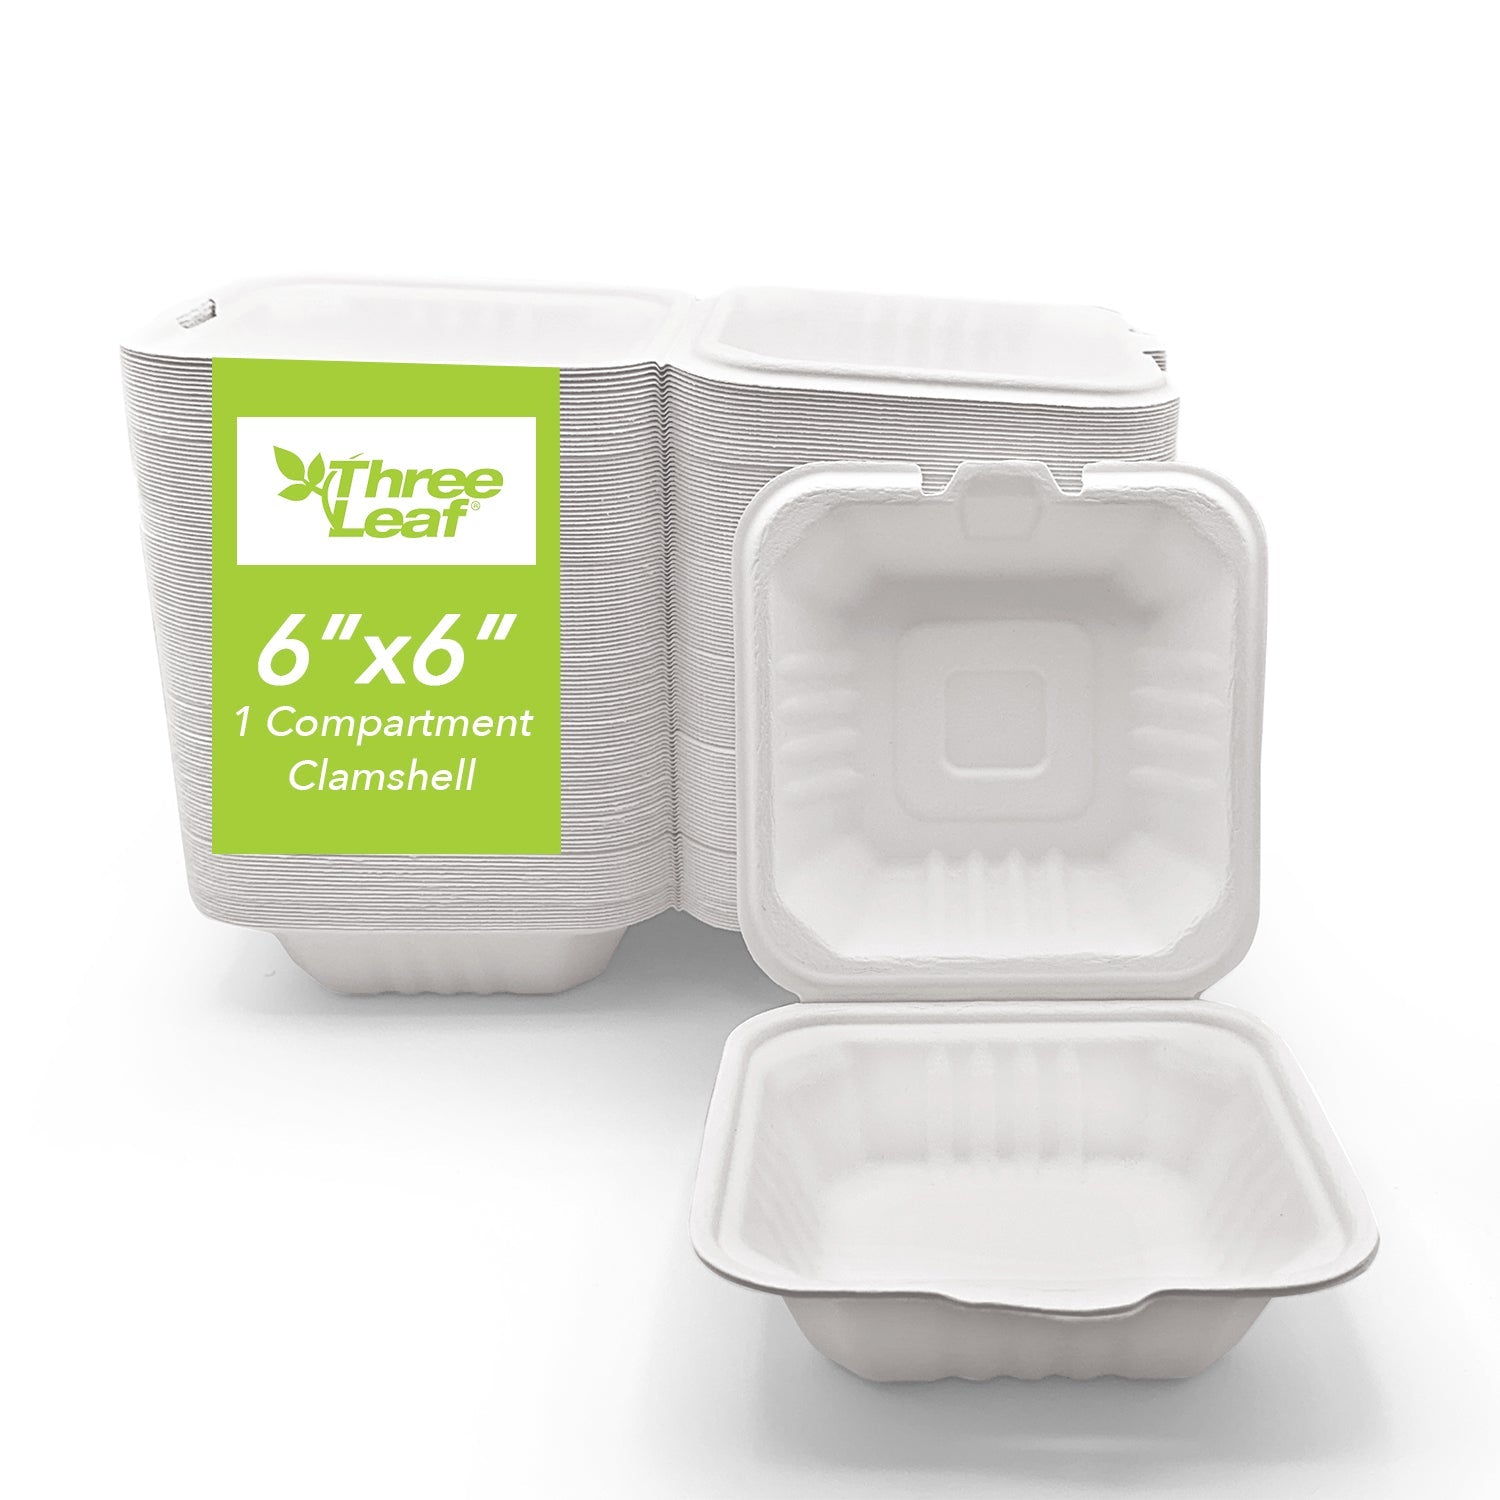 6x6x3 Eco-Friendly Disposable Takeout Box / Burger Box (500 Count